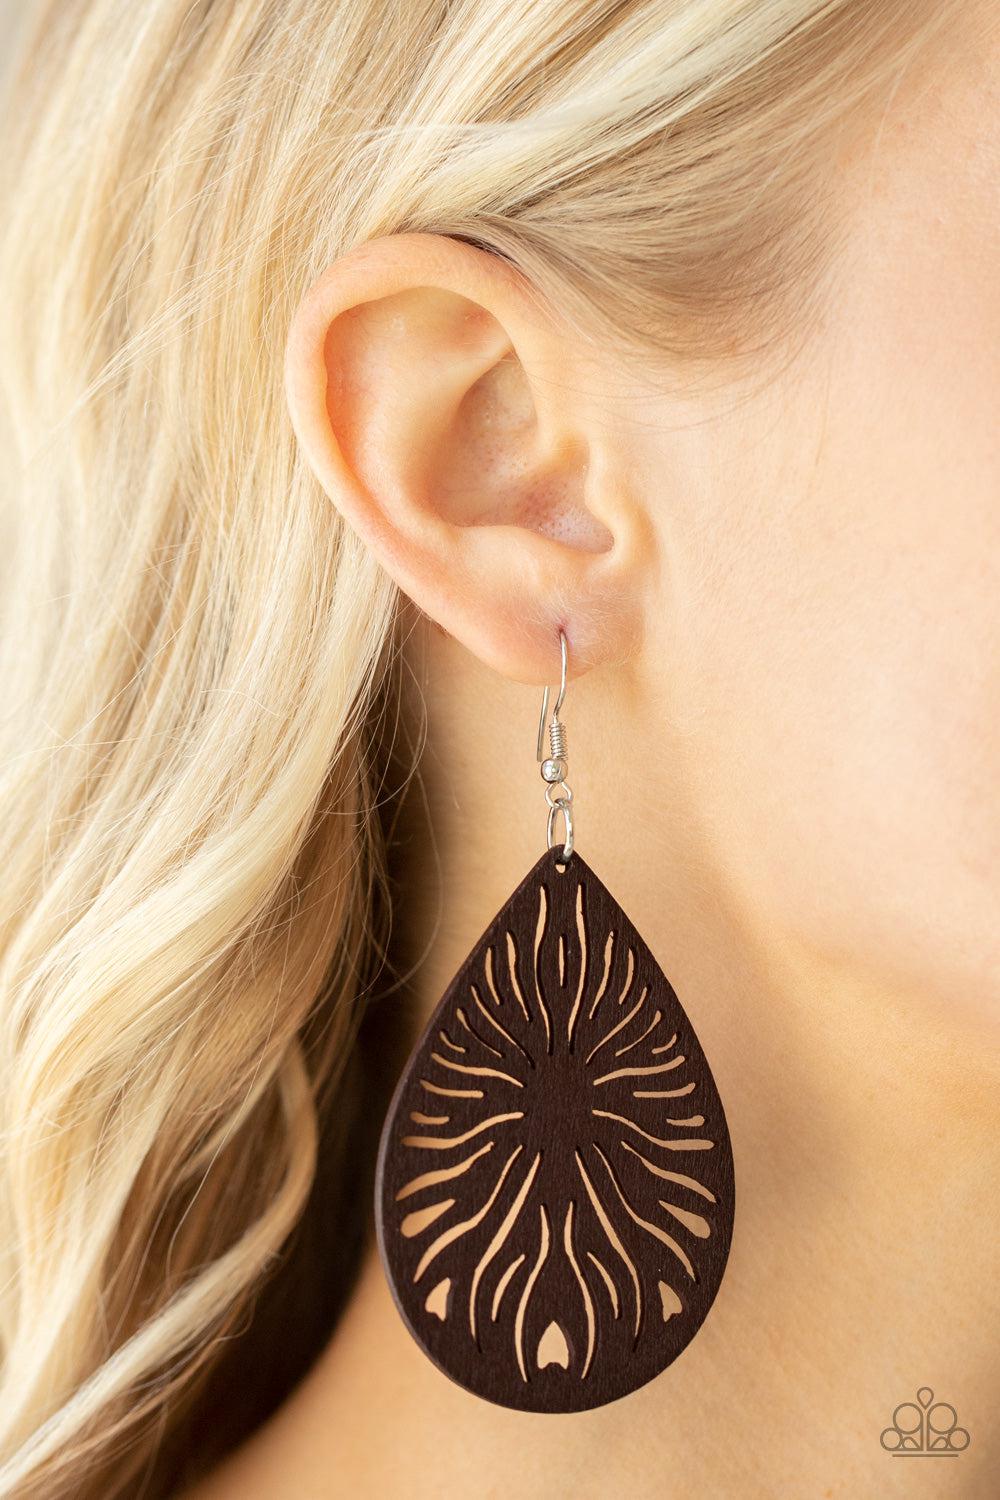 Sunny Incantations Brown Wood Earrings - Paparazzi Accessories-on model - CarasShop.com - $5 Jewelry by Cara Jewels